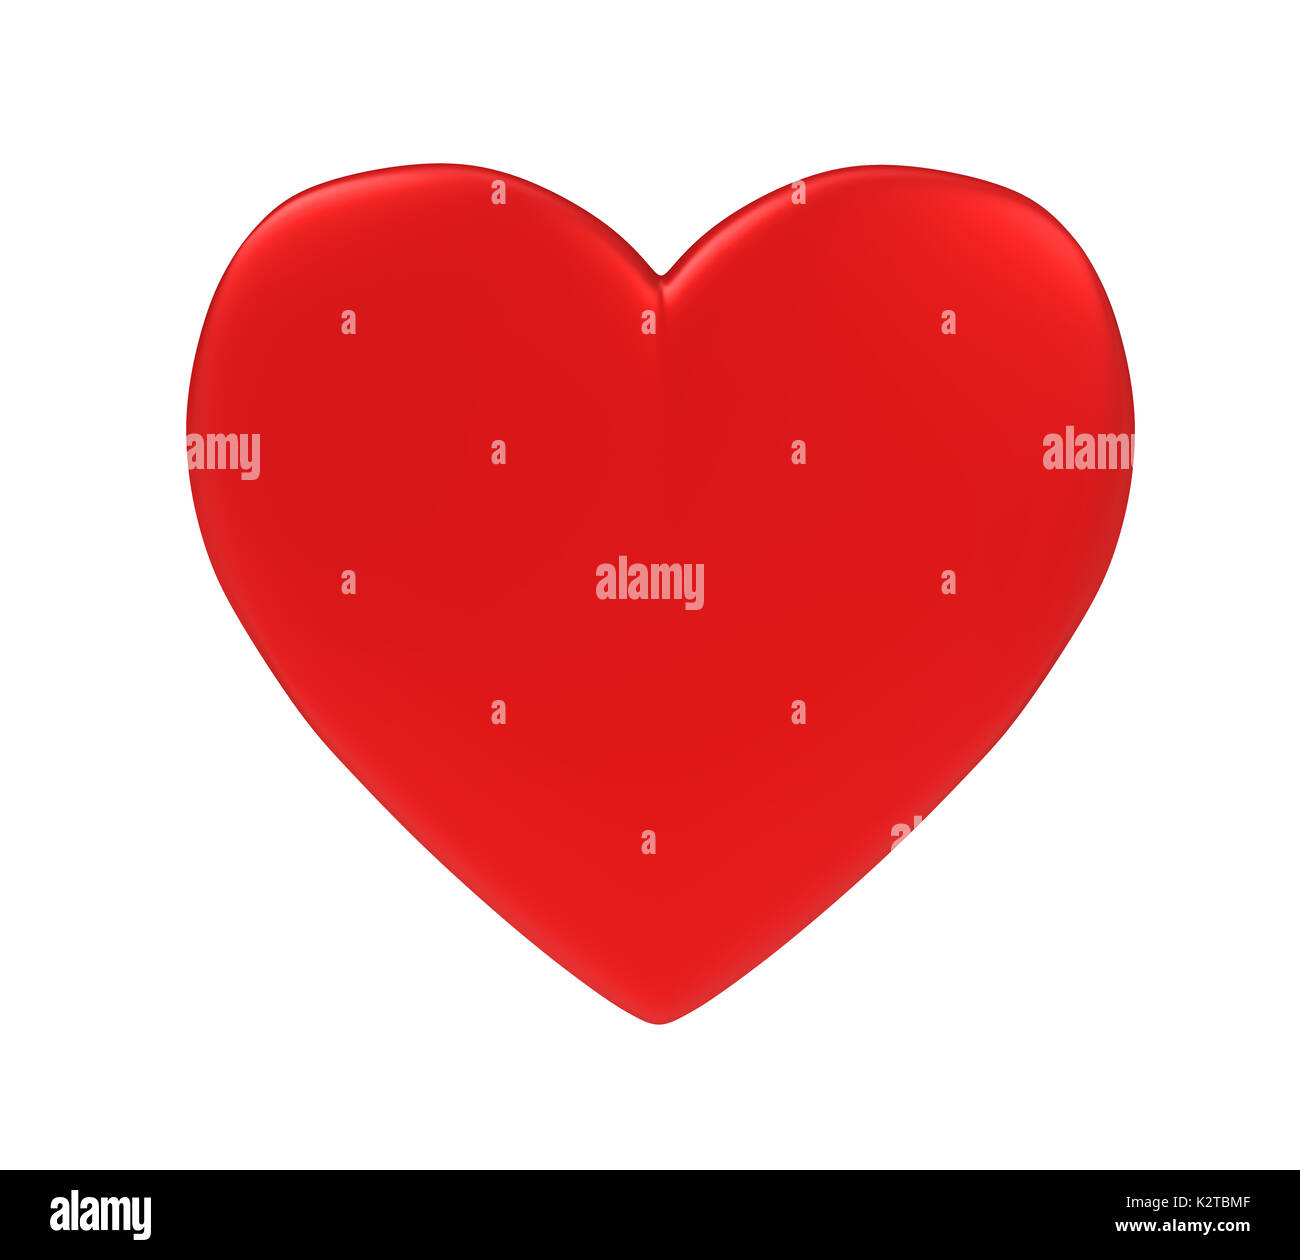 Heart shape Cut Out Stock Images & Pictures - Alamy